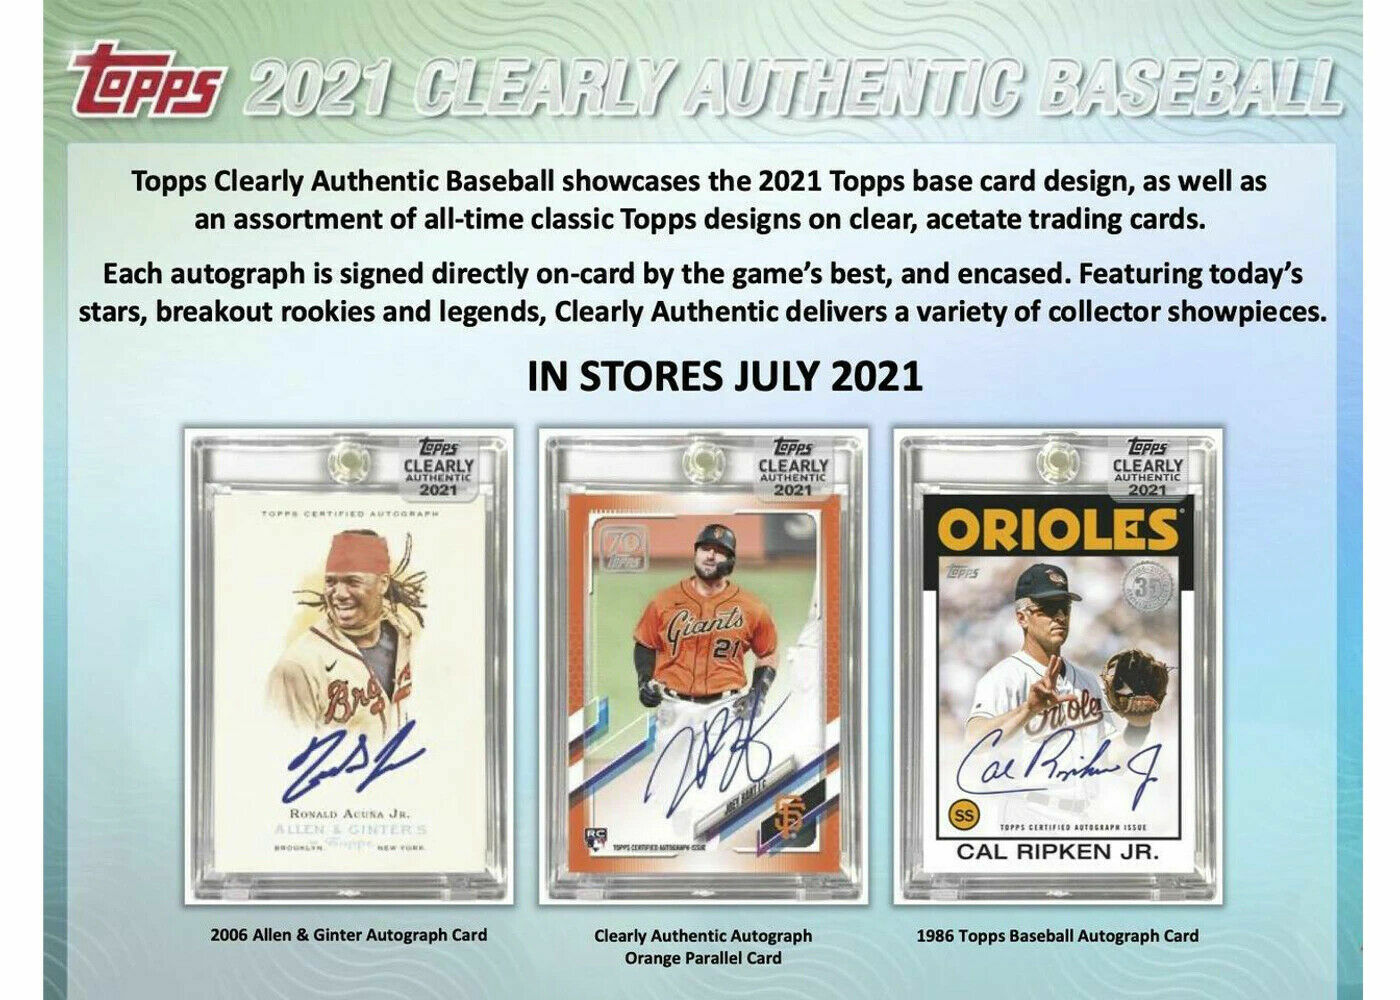 TAMPA BAY RAYS 2021 TOPPS CLEARLY AUTHENTIC BASEBALL Half CASE 10 BOX BREAK #1